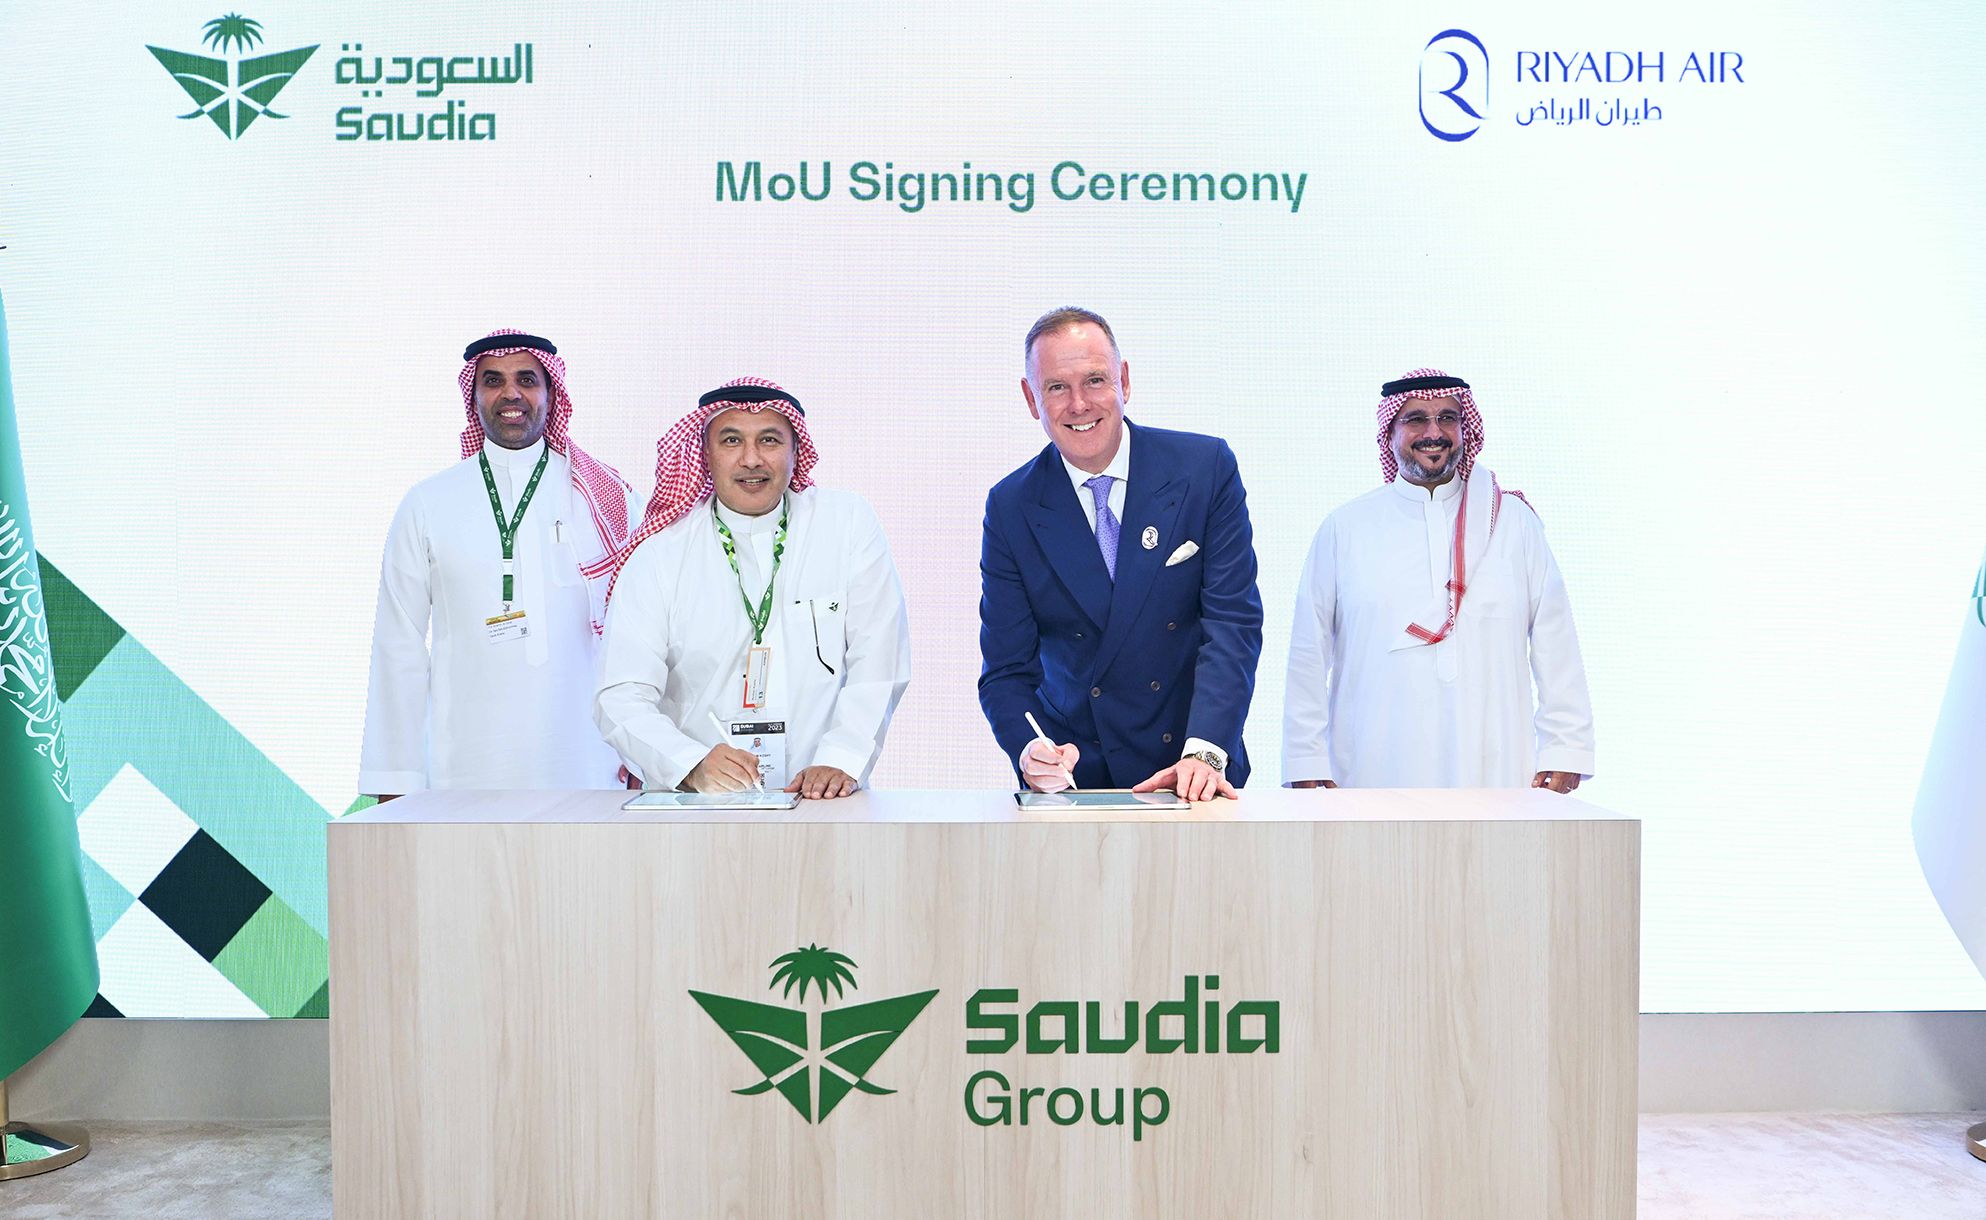 Saudia And Riyadh Air Sign A Strategic Cooperation MOU As Part Of An Expansive Agreement Signifying Collaborative Strength In The Saudi Arabian Aviation Ecosystem